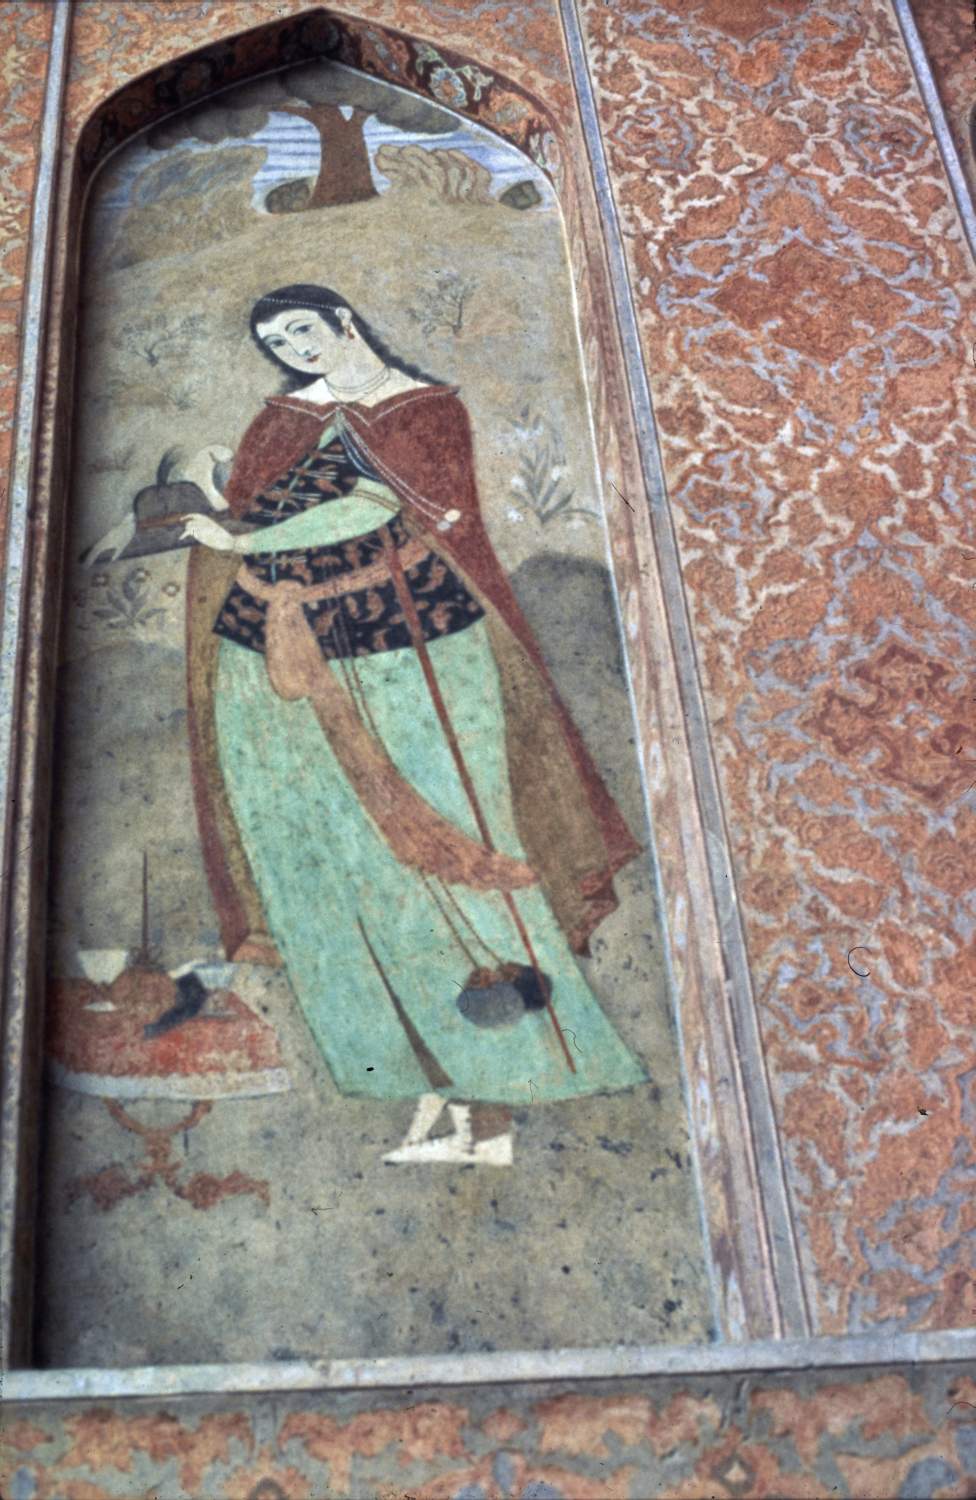 Talar porch, painting of woman in niche on south wall of iwan leading to audience hall at rear of porch (west side).